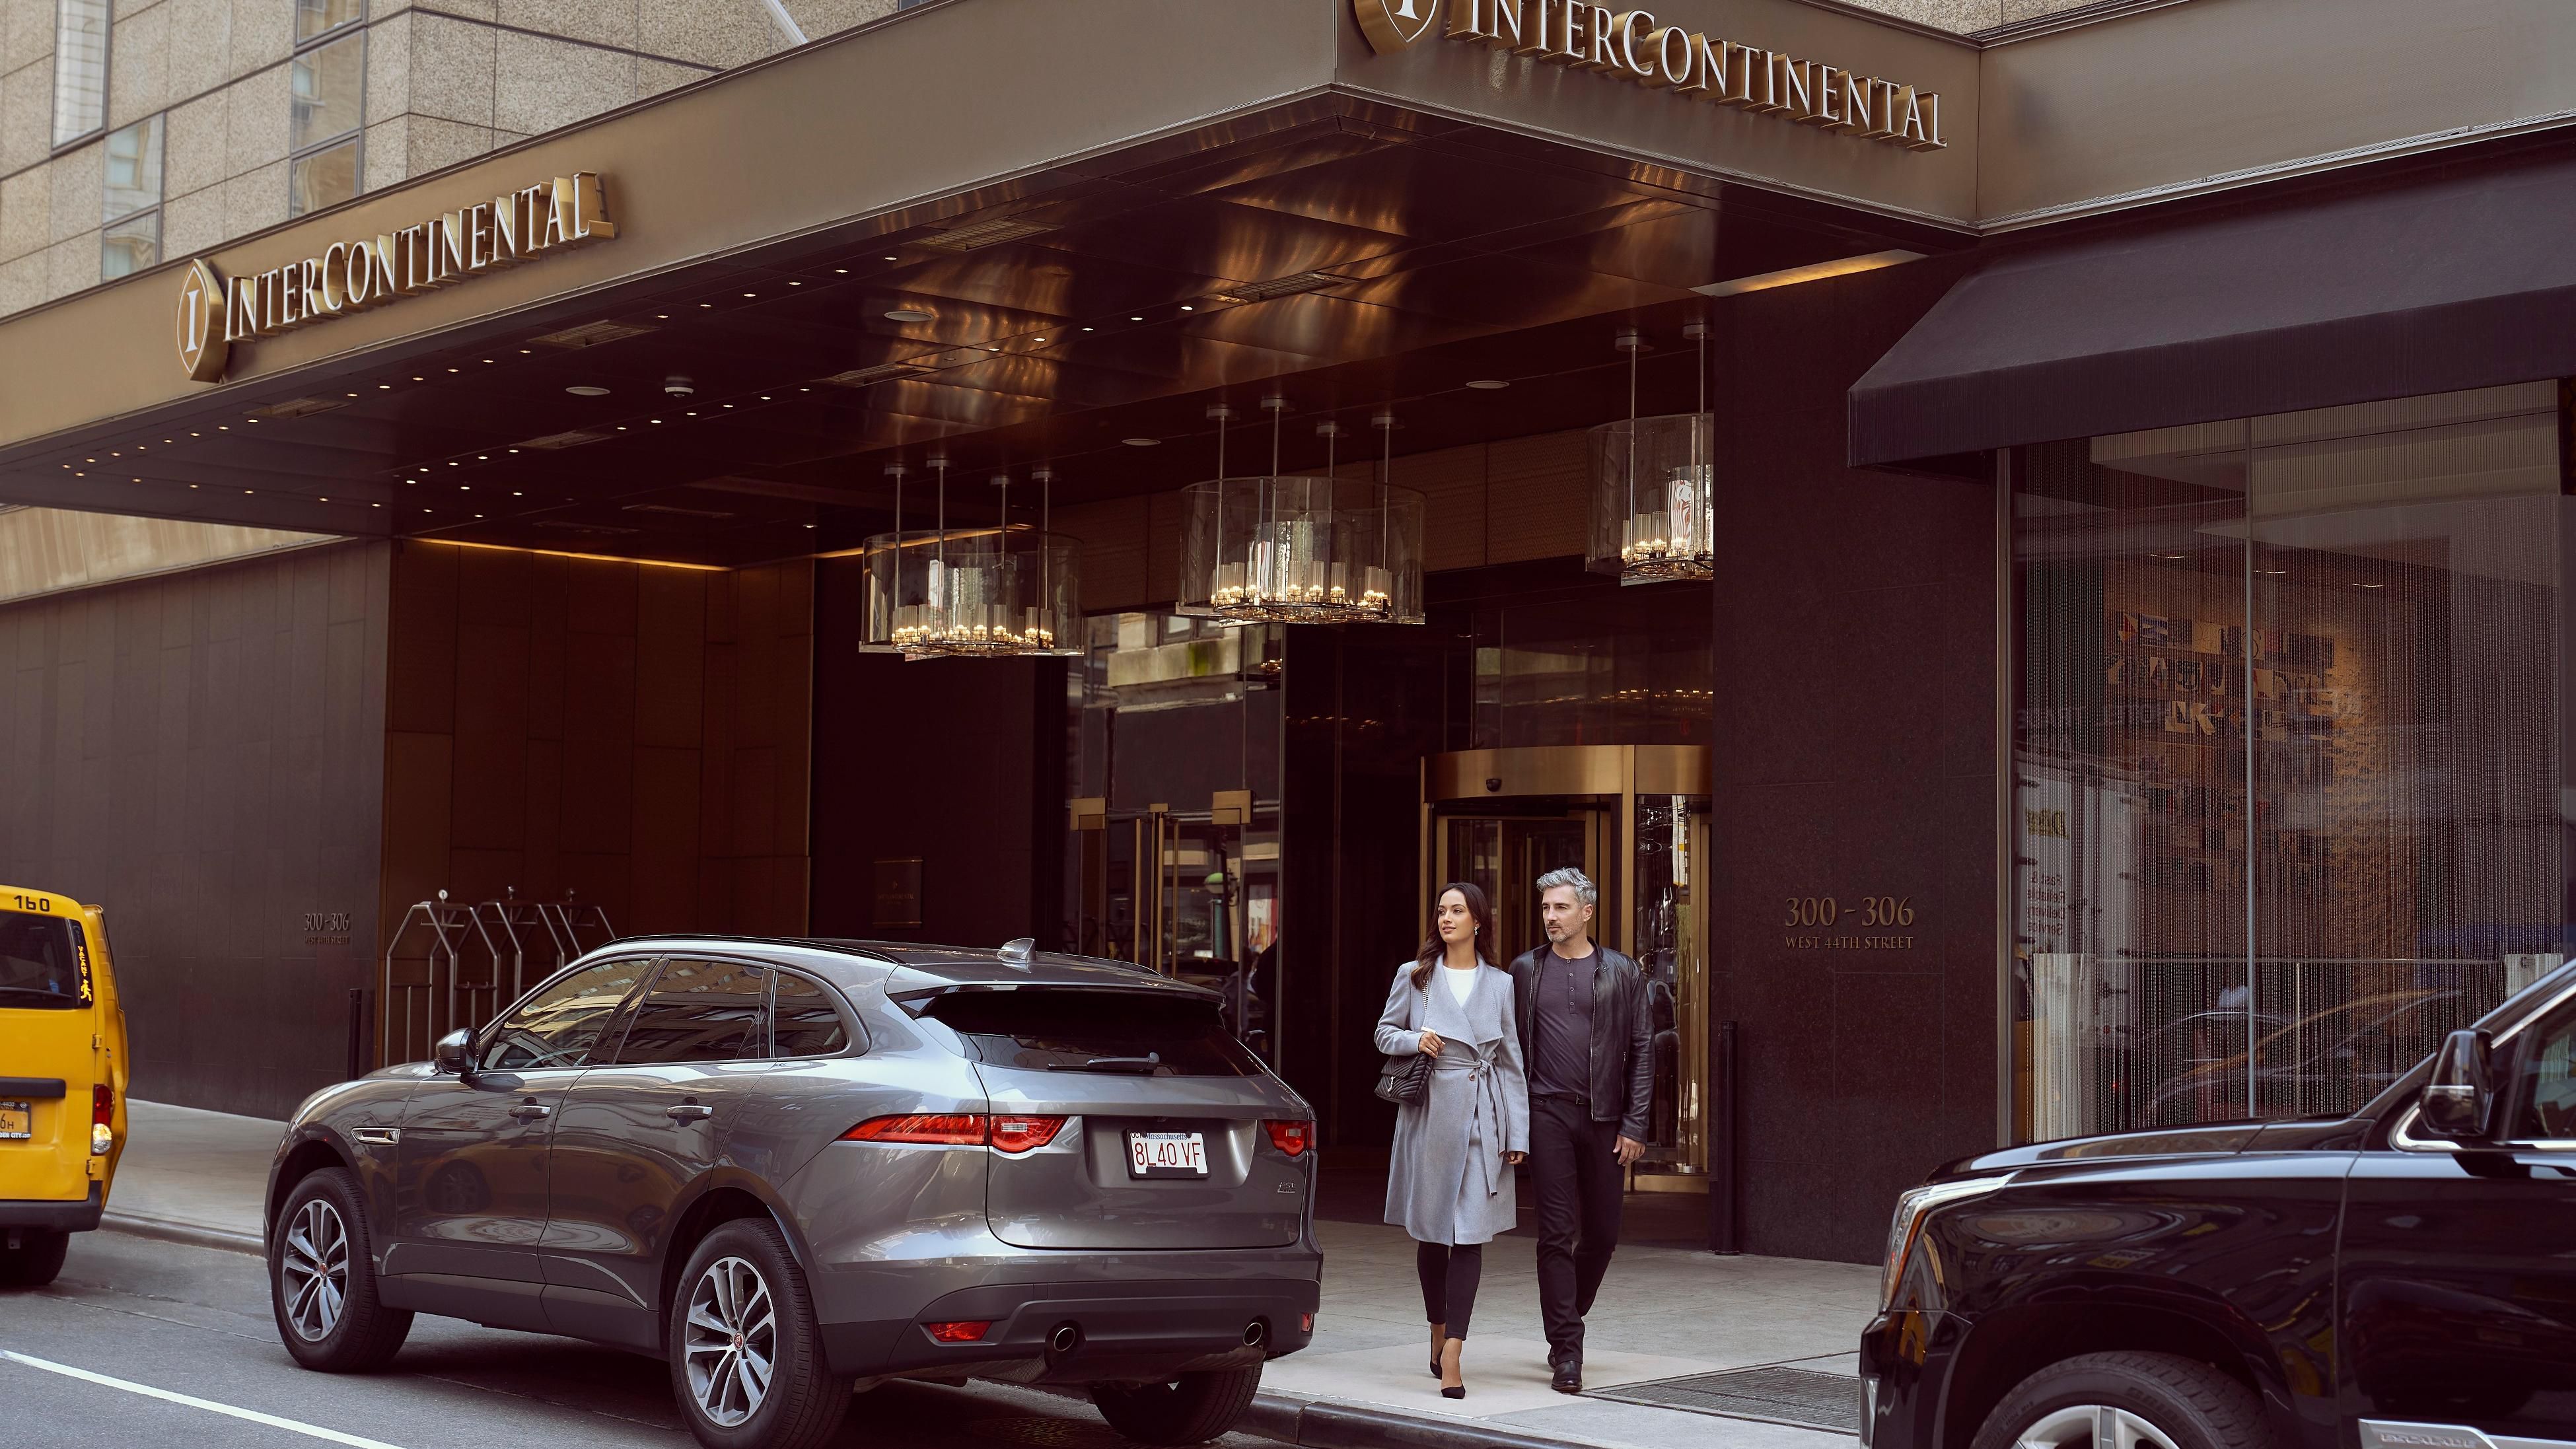 InterContinental New York Times Luxehotel in New York